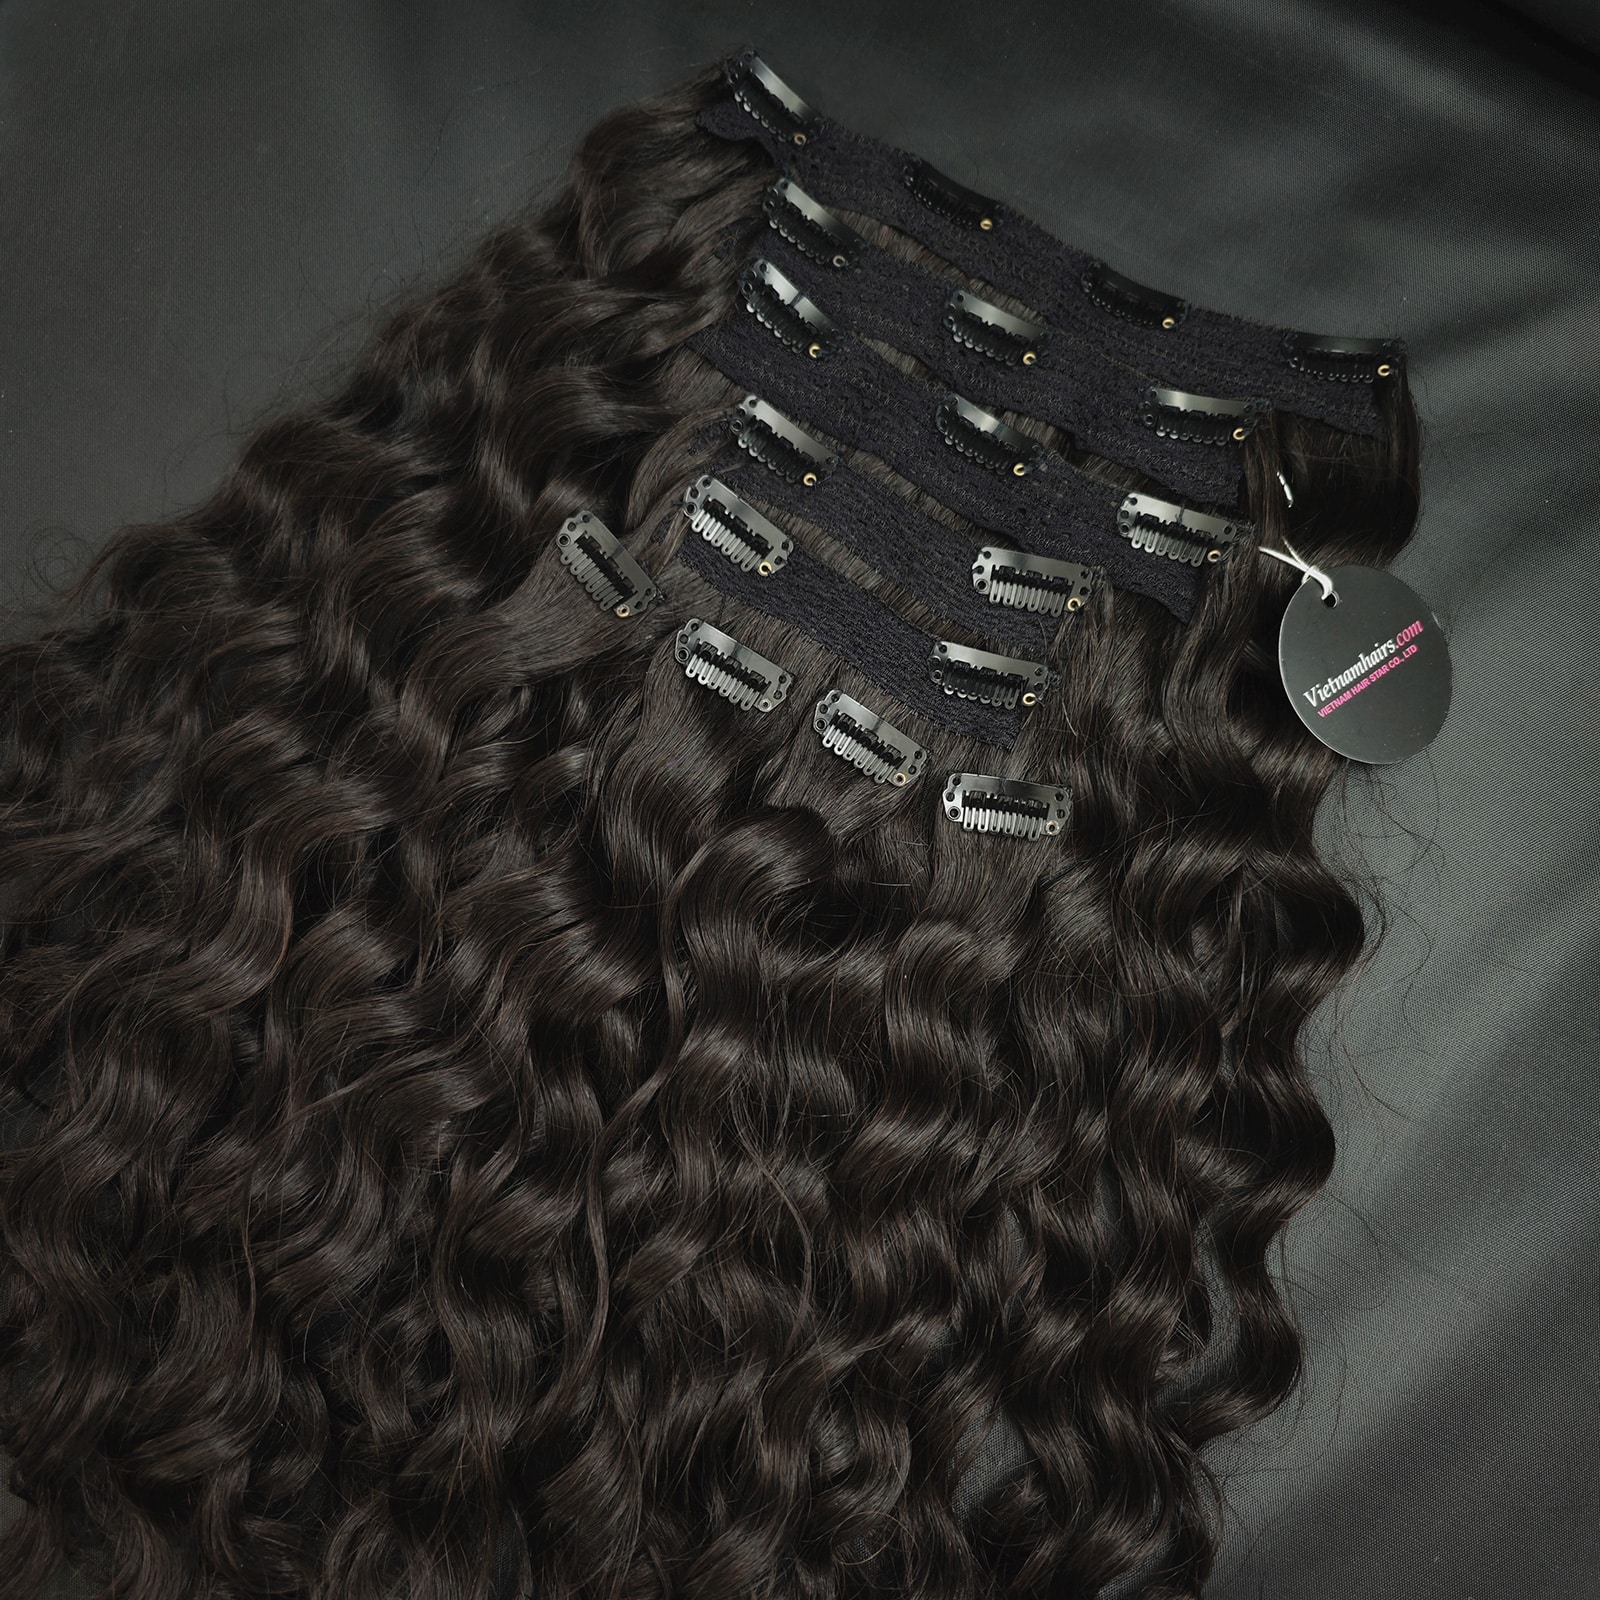 Black Curly Hair Extensions (Head)